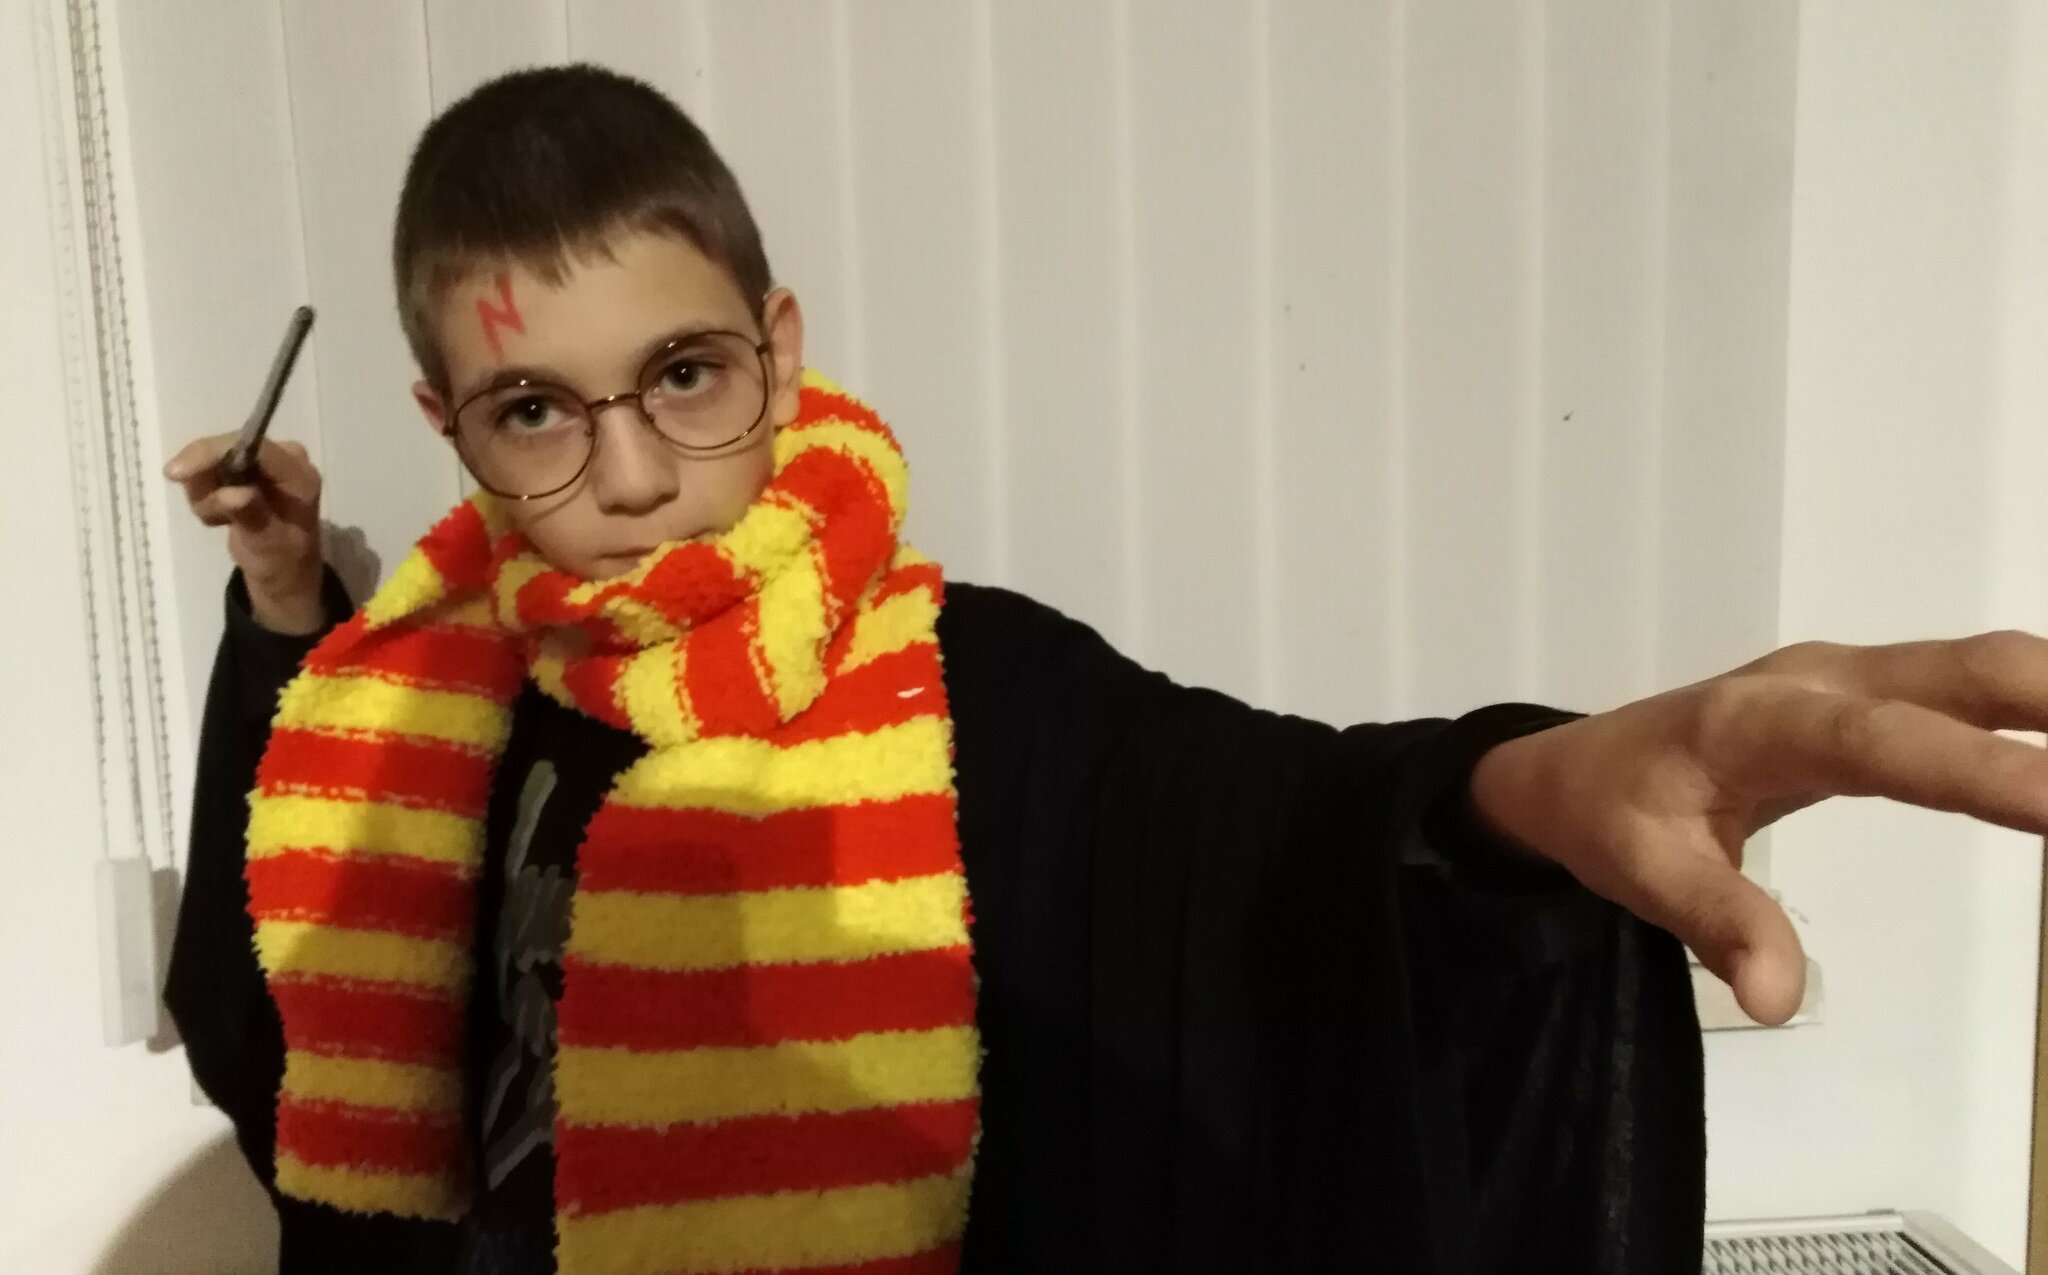 Halloween: St. Oswald is all about Harry Potter

